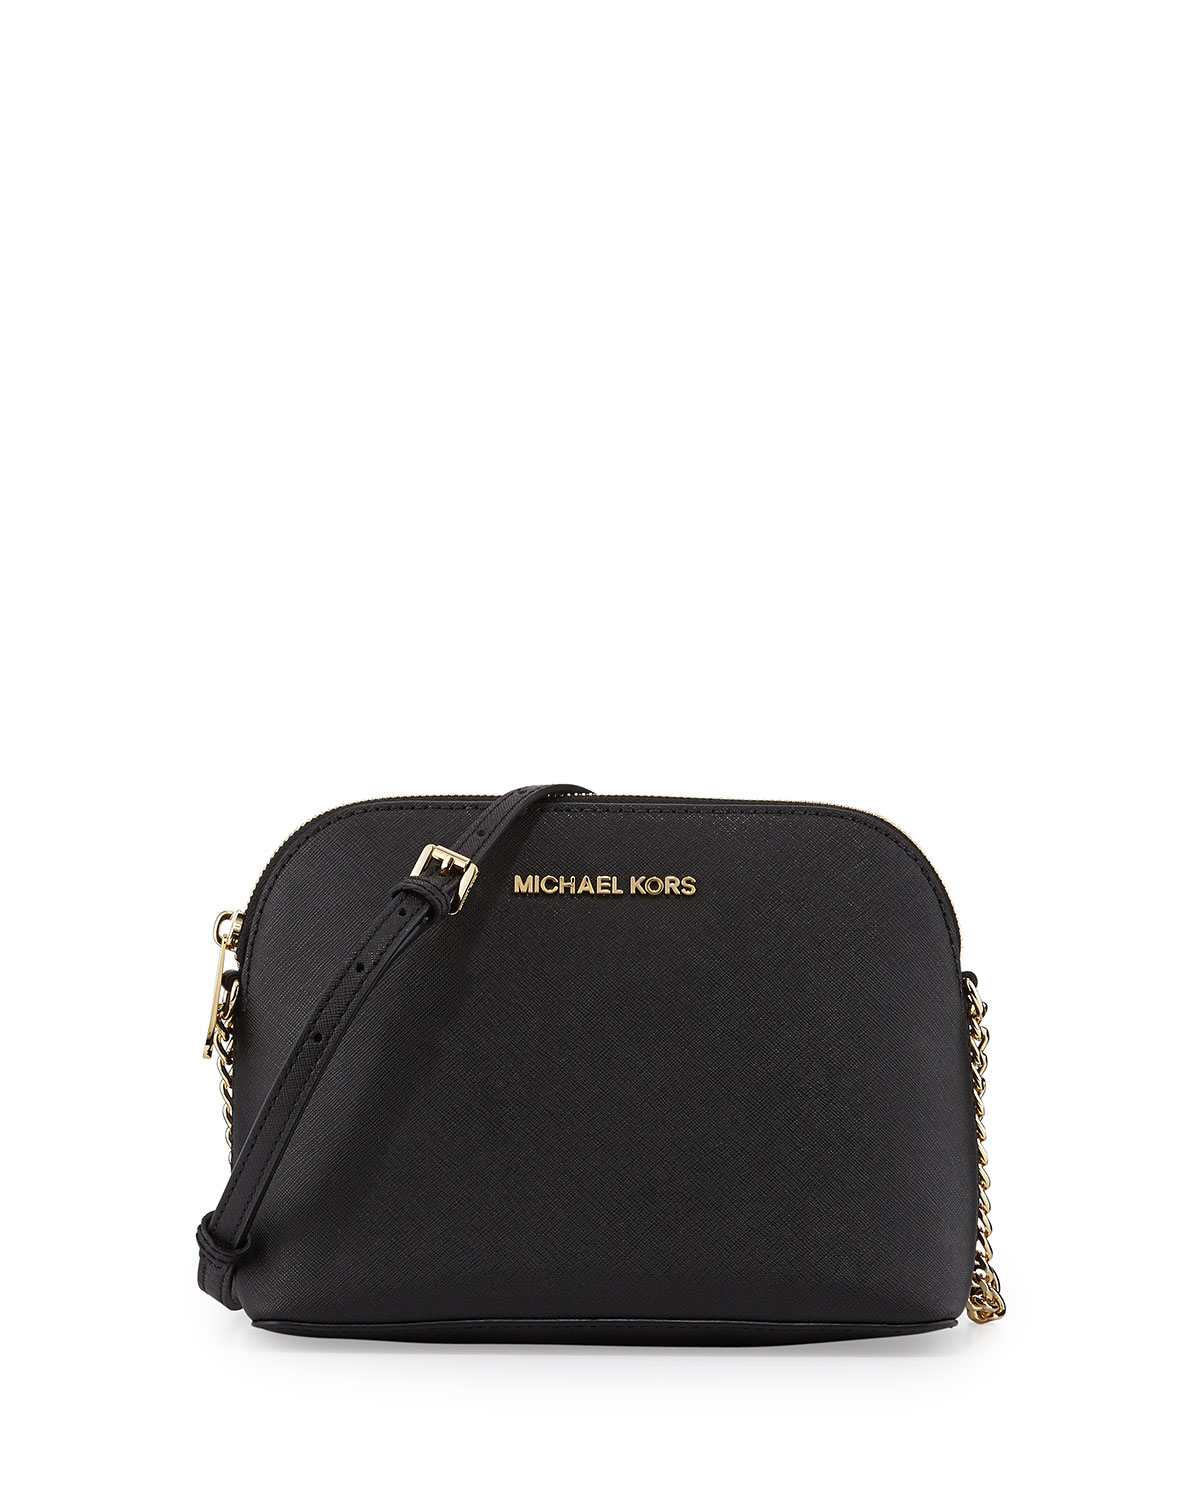 Lyst - Michael Michael Kors Cindy Large Dome Leather Cross-Body Bag in Black